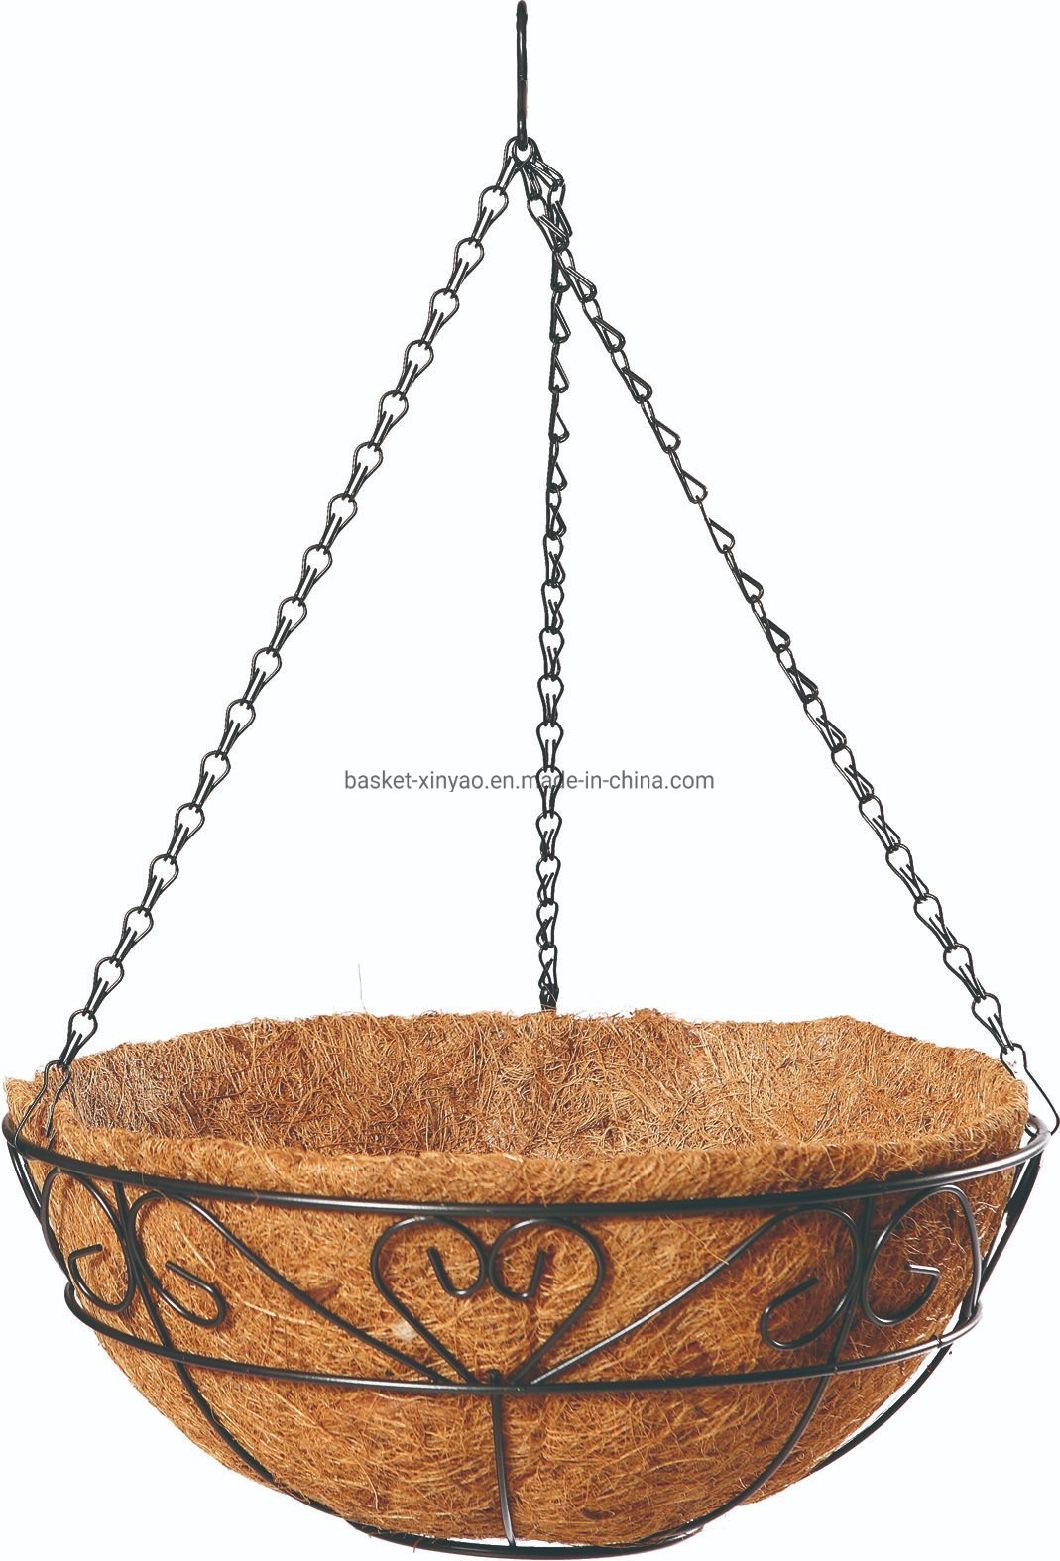 Wrought Iron Flower Hanging Basket with Chains and Coco Liner (Bh090002)